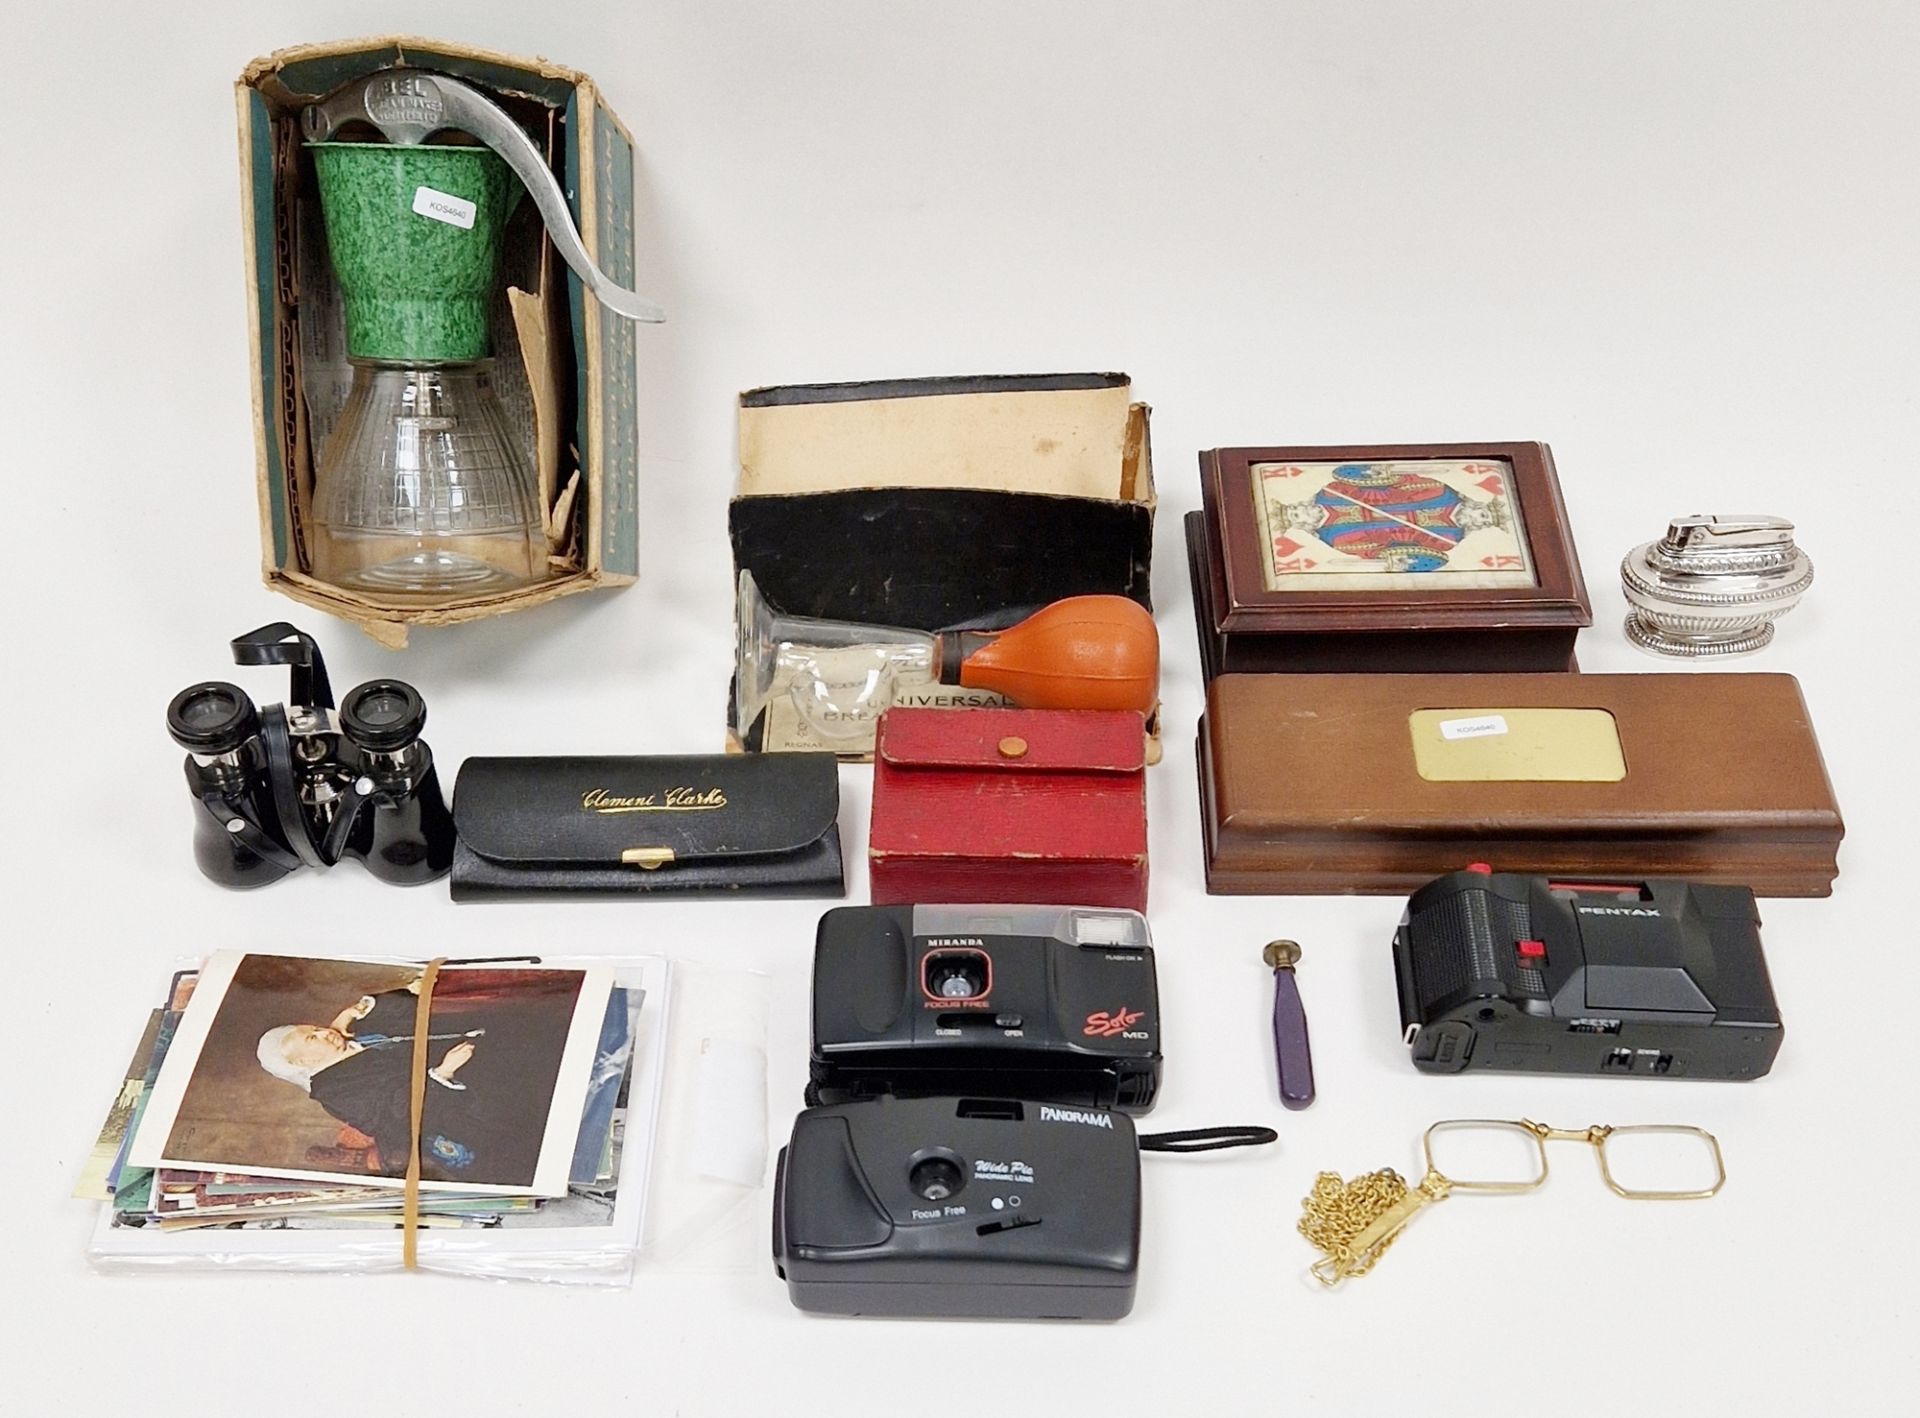 Vintage cream maker labelled Bell, Made in England, in original box, assorted cameras, a Ronson